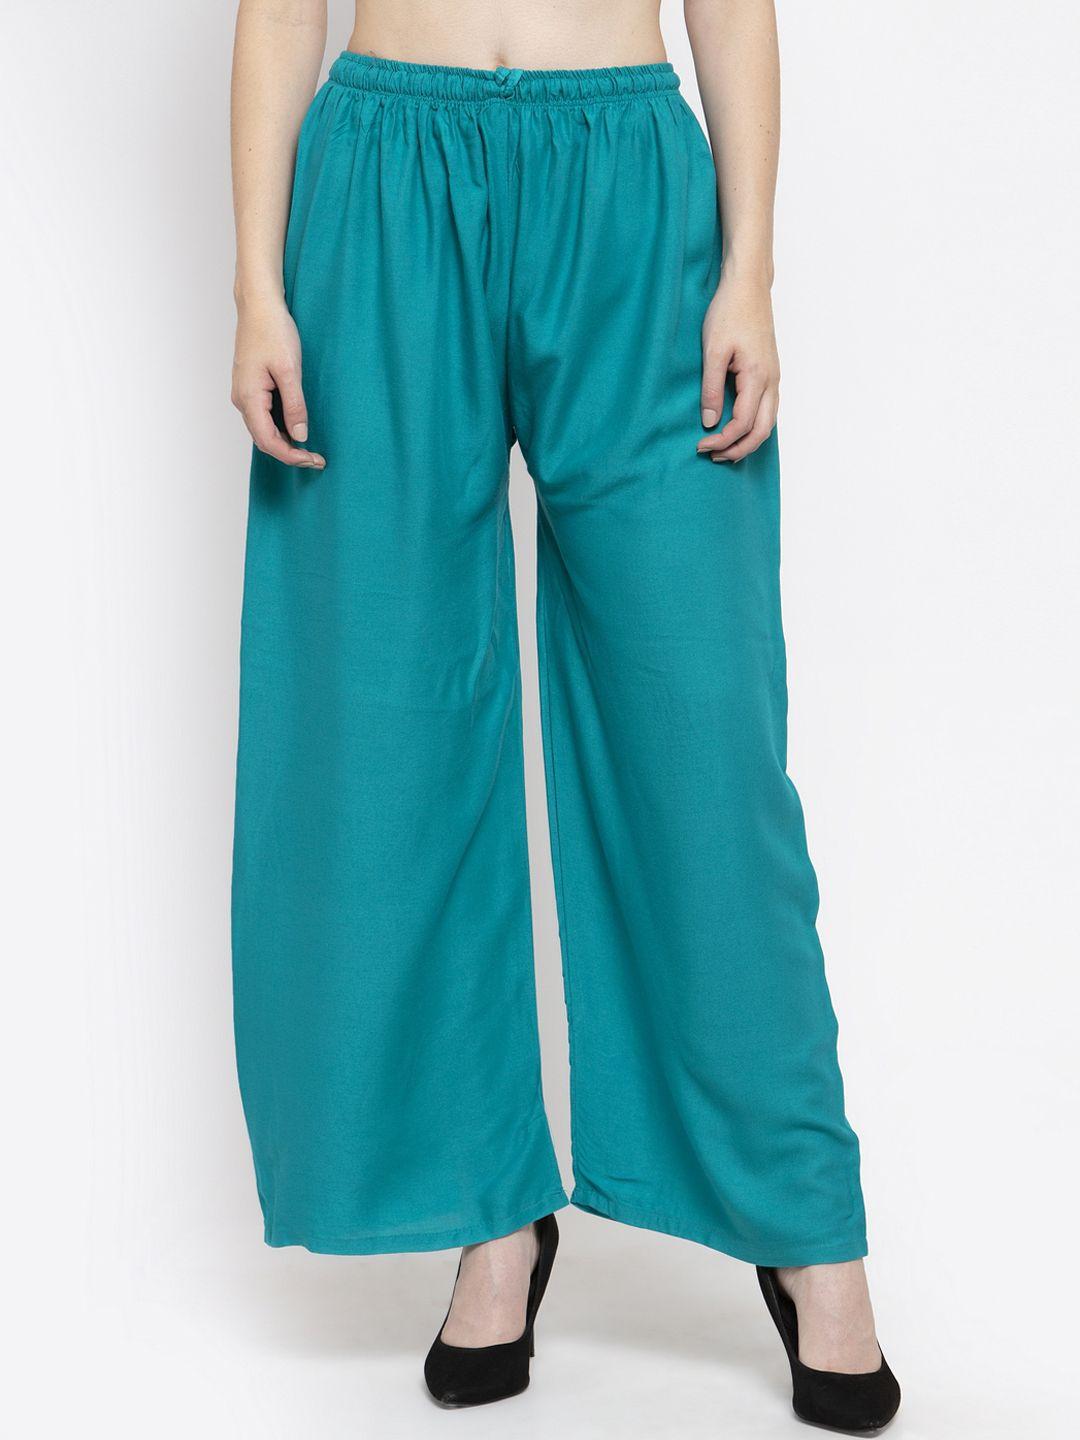 clora-creation-women-turquoise-blue-solid-straight-palazzos